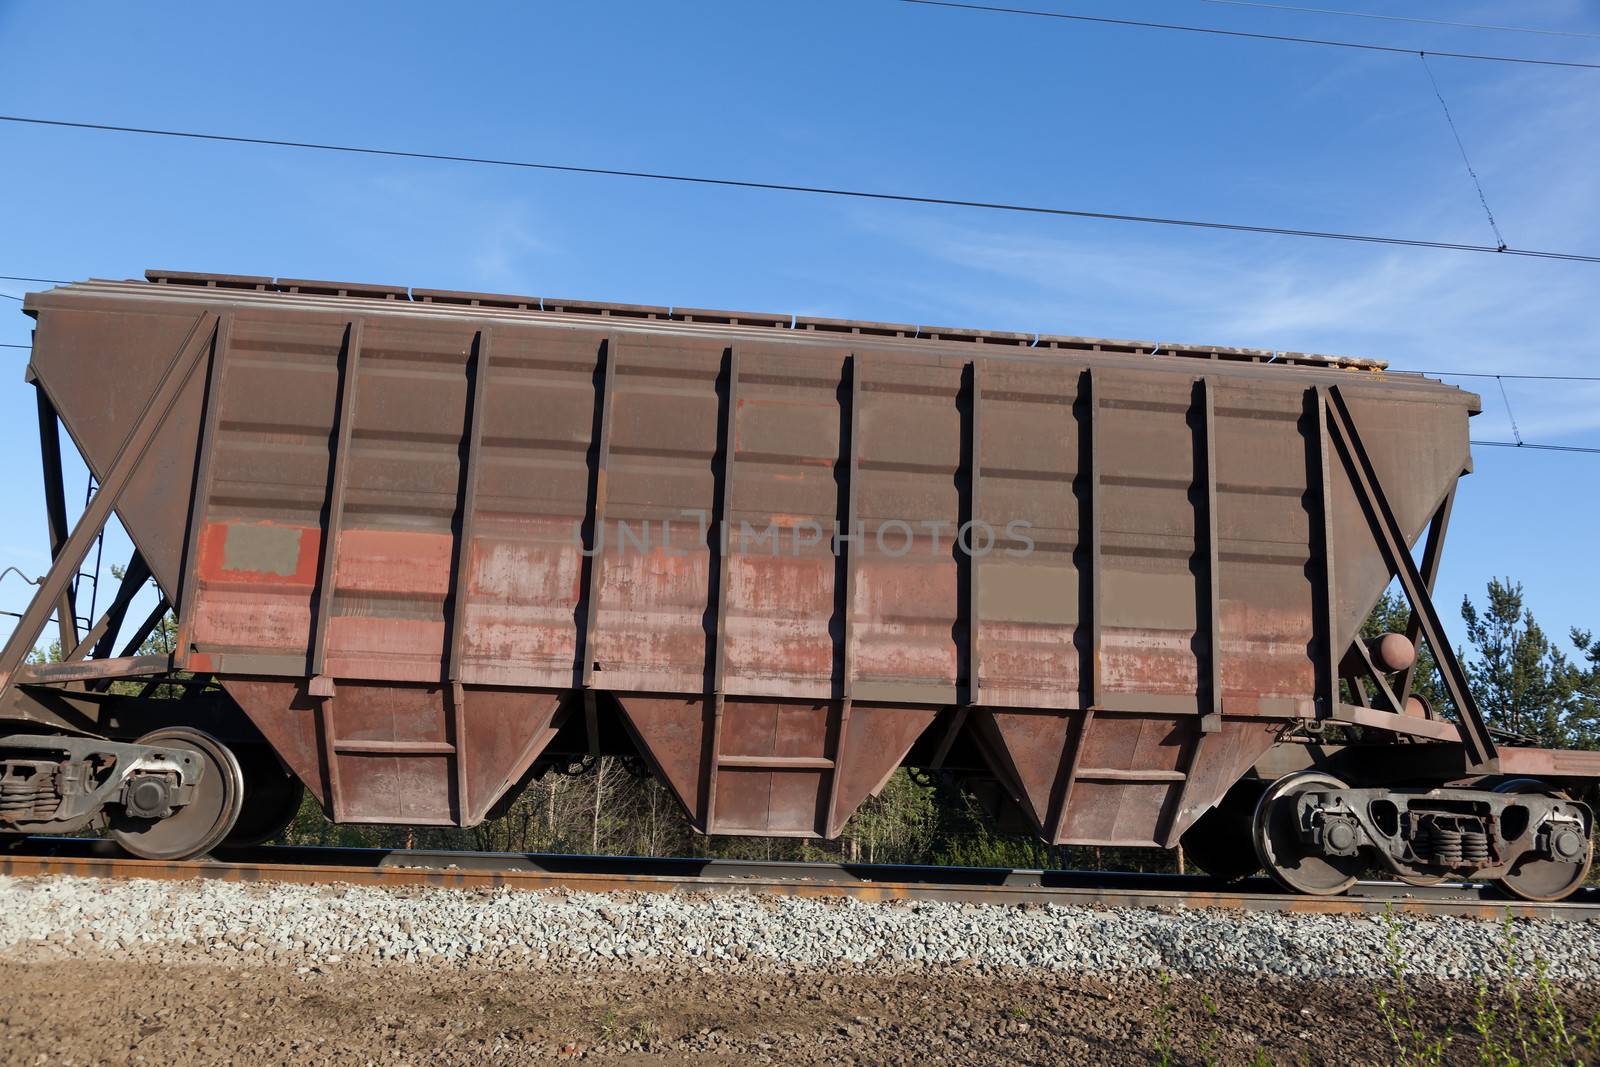 The rail car of a freight train. In a forest and blue sky.